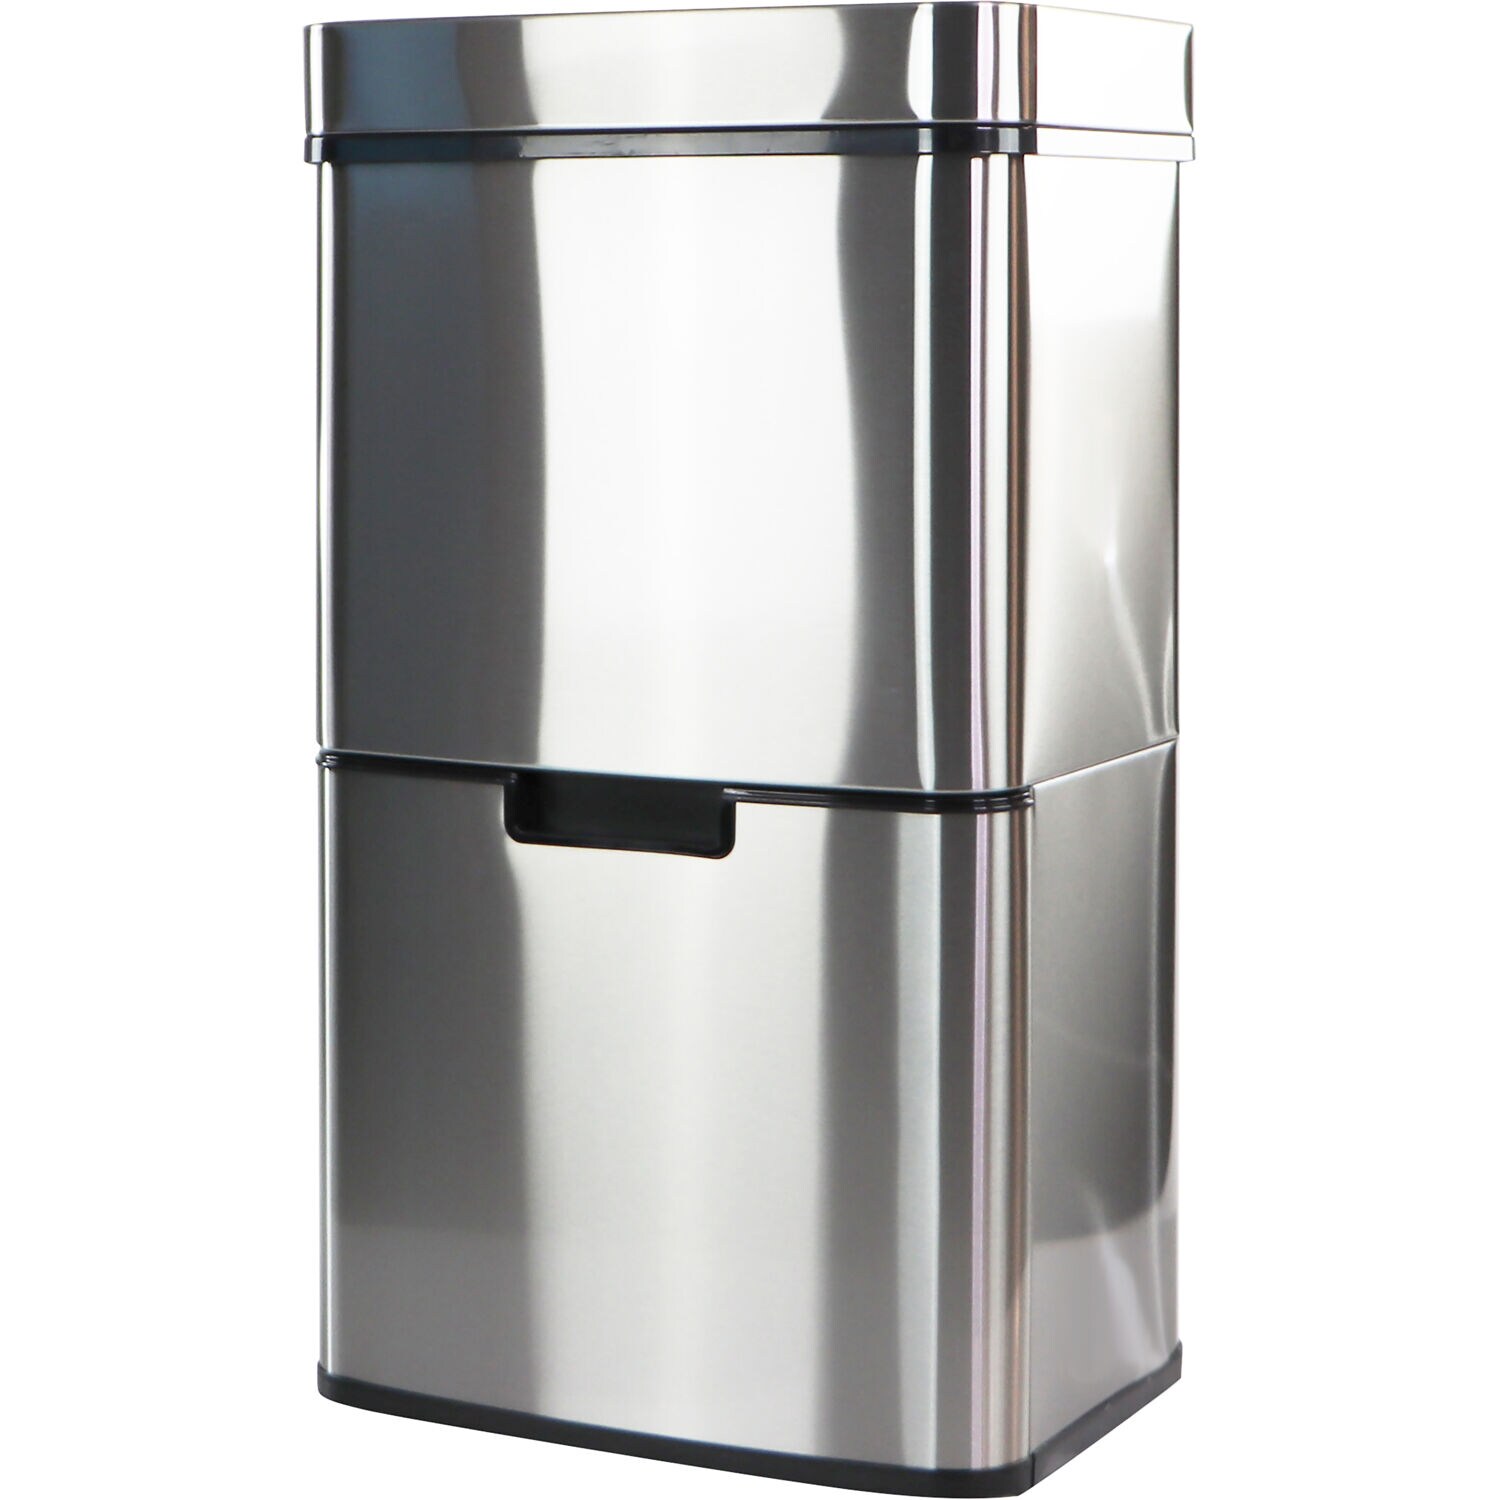 Hanover 16.4-Gallons Stainless Steel Touchless Kitchen Trash Can with ...